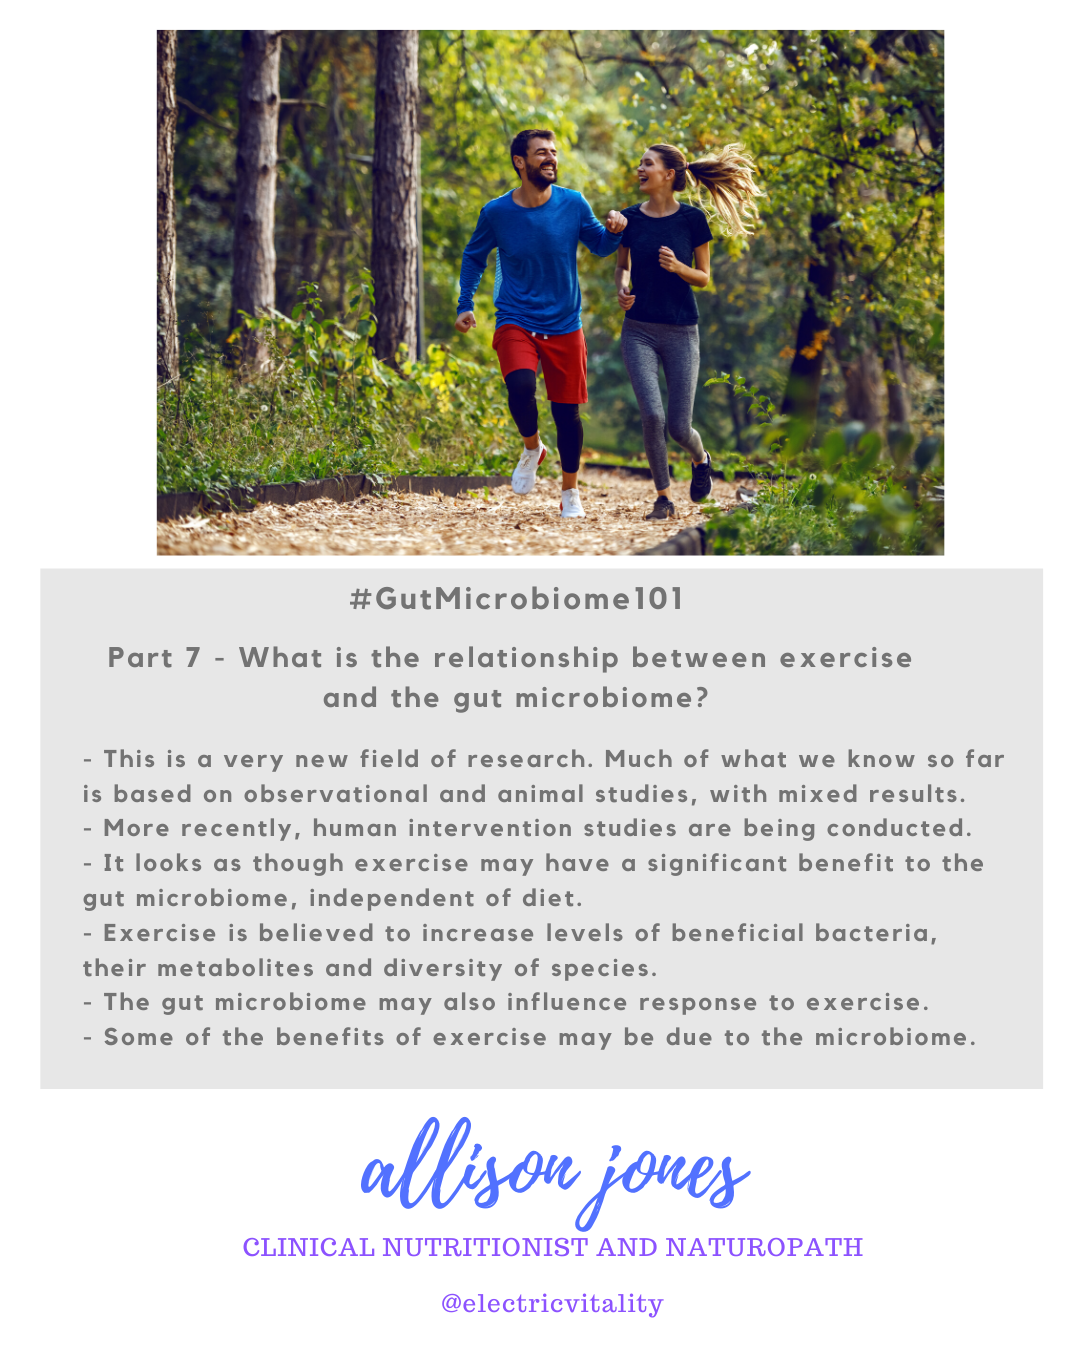 Graphic summarising article key points - the relationship between exercise and the microbiome